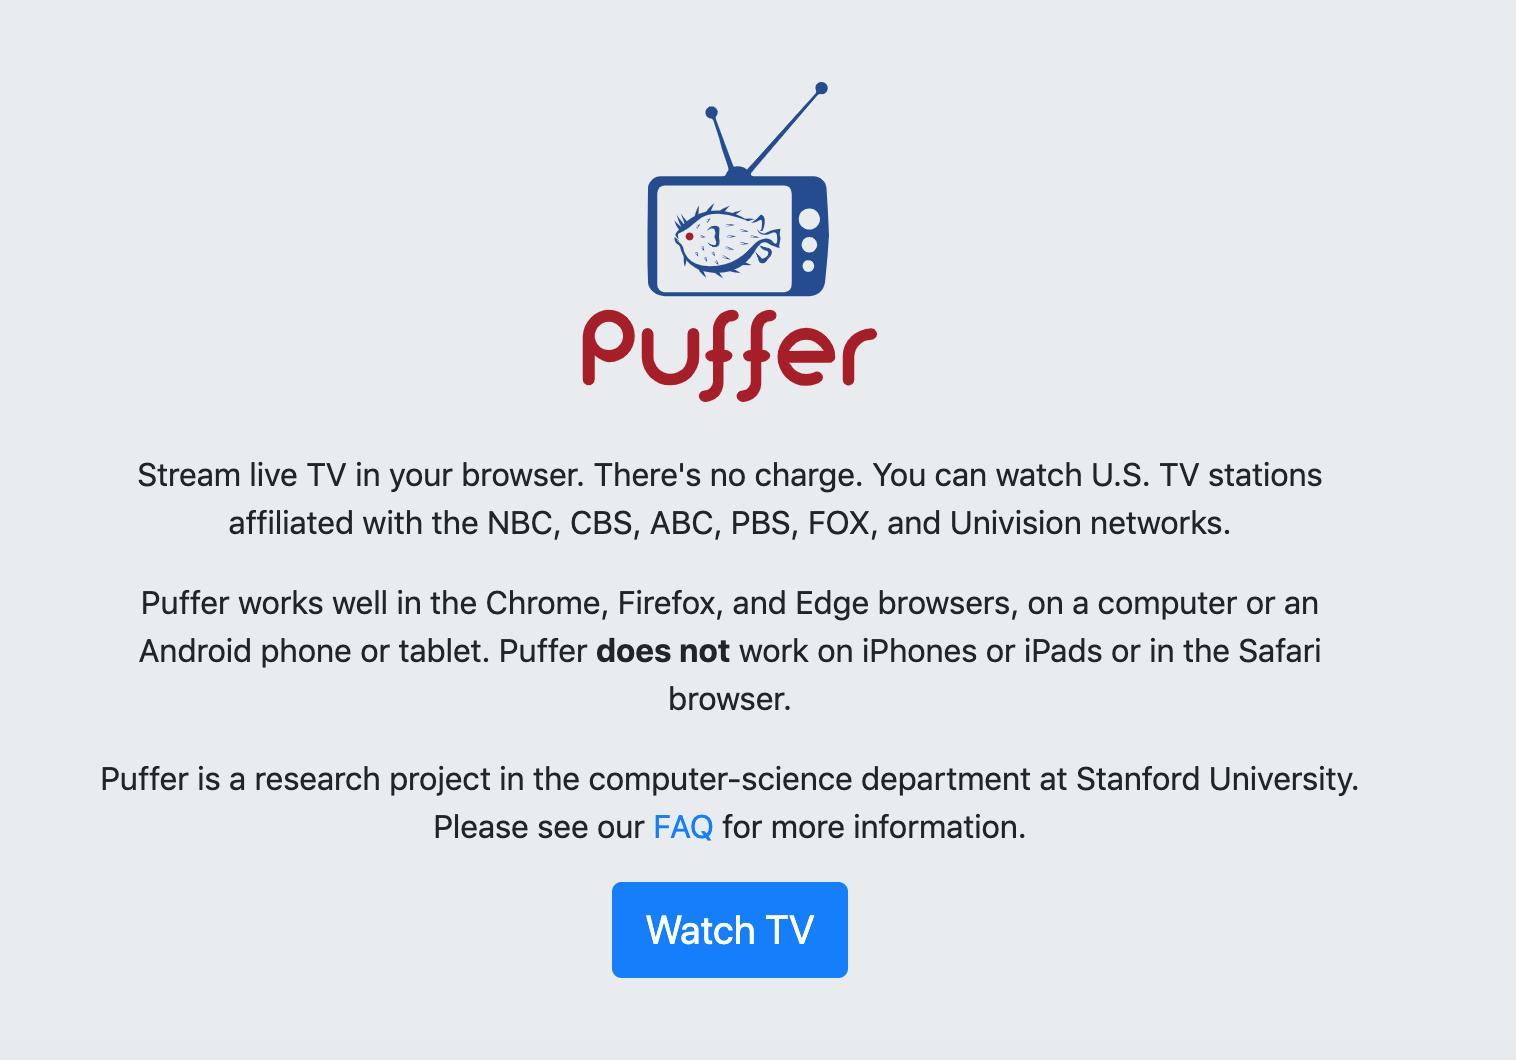 Robin Howlett on Twitter: ""Puffer", from @Stanford: "Stream live TV in  your browser. There's no charge. You can watch U.S. TV stations affiliated  with the NBC, CBS, ABC, PBS, FOX, &amp; Univision